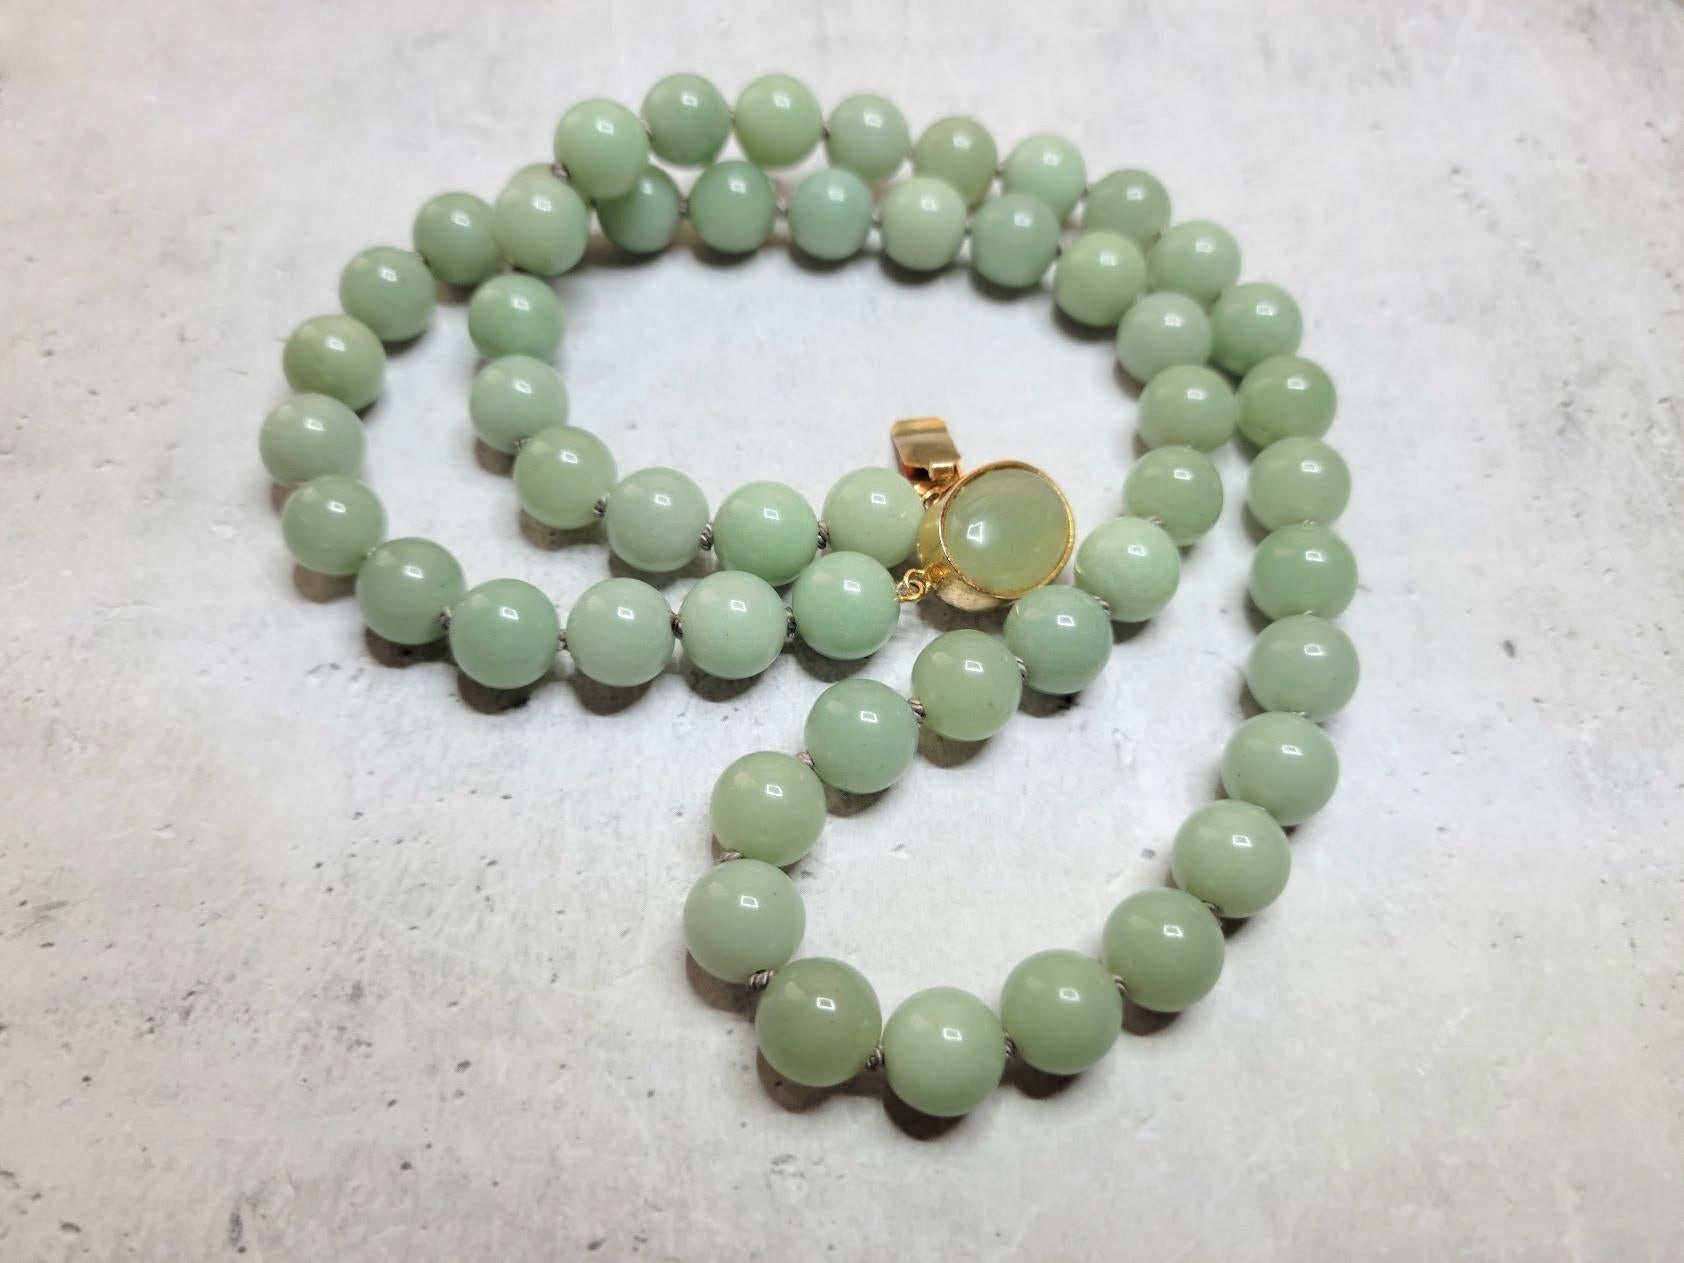 New Zealand Green Jade Nephrite Necklace In Excellent Condition For Sale In Chesterland, OH